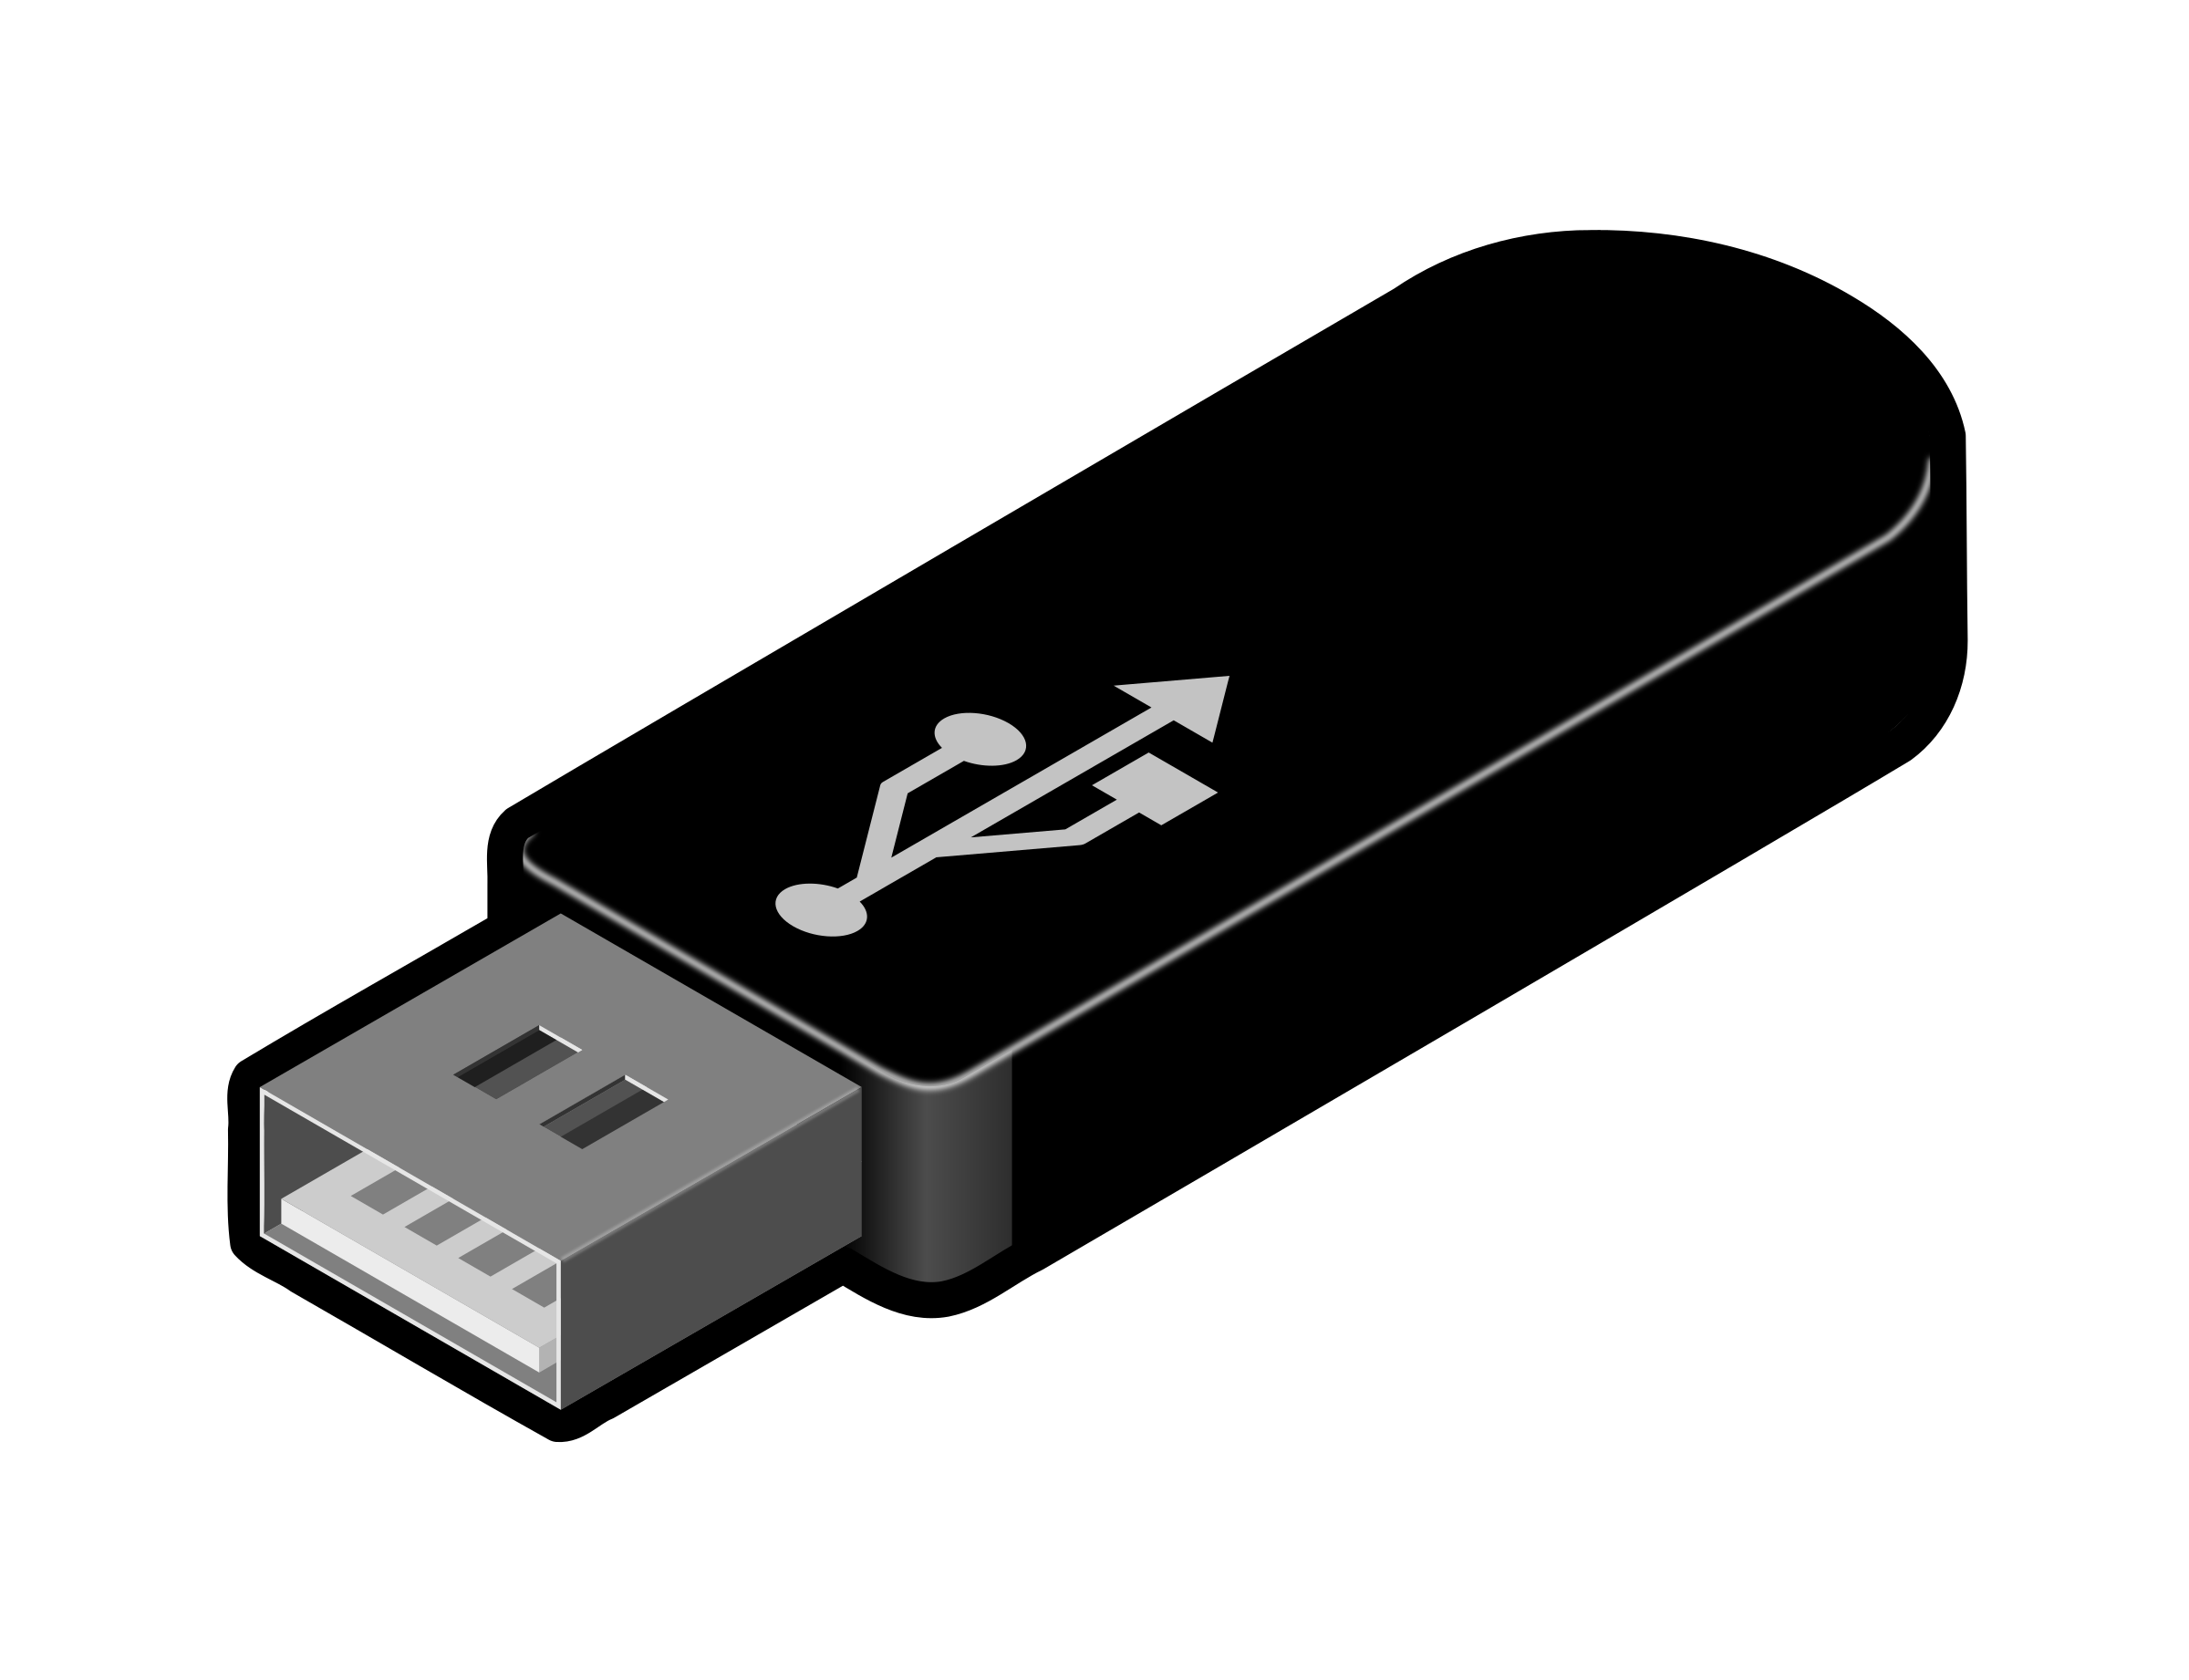 Usb Pen Drive Free Photo PNG PNG Image